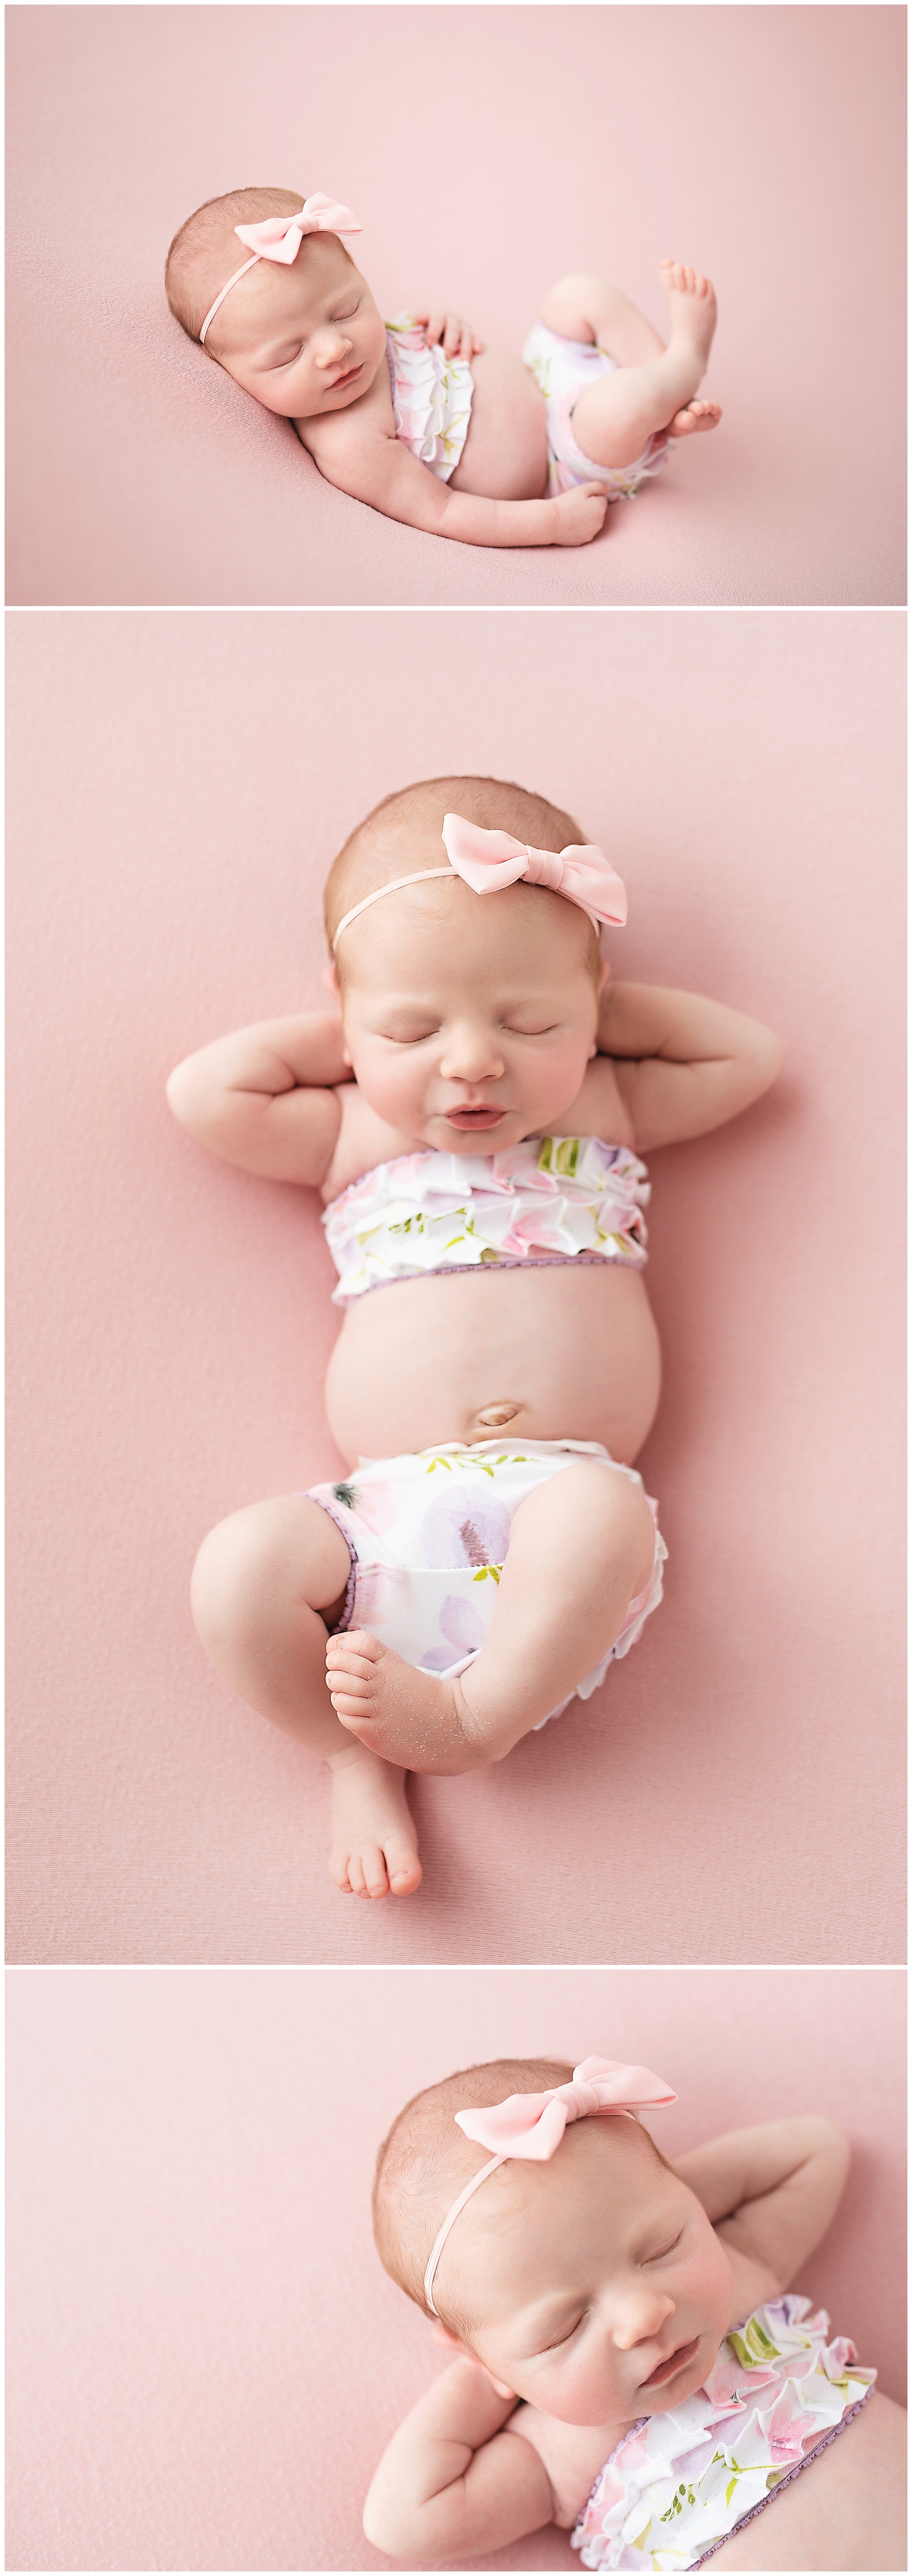 newborn baby girl relaxing in her outfit for newborn photo session